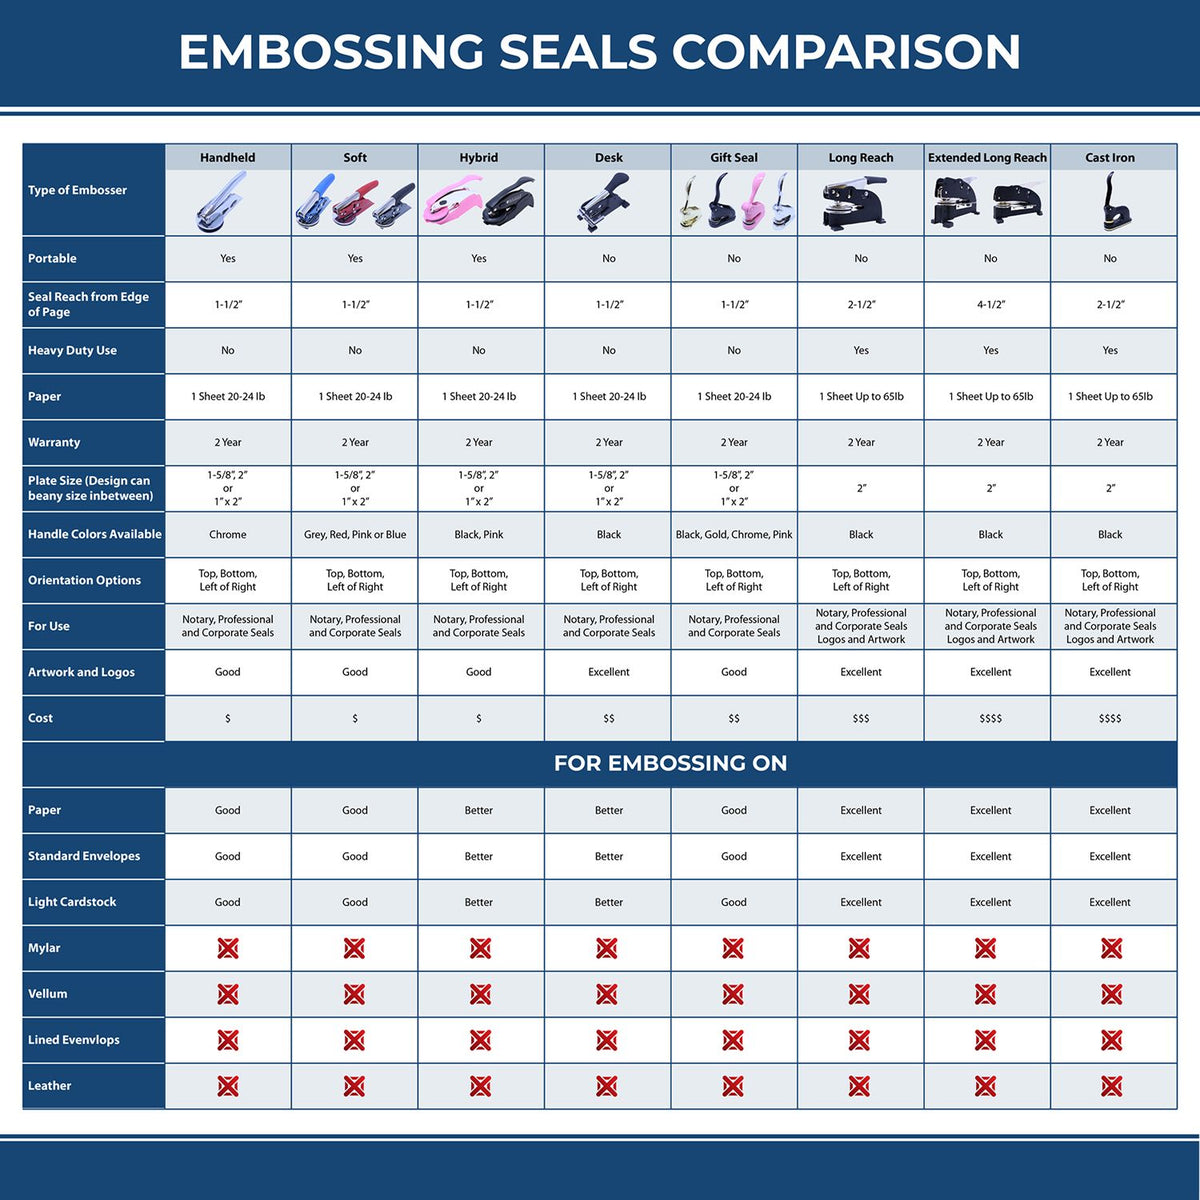 A comparison chart for the different types of mount models available for the State of Iowa Extended Long Reach Geologist Seal